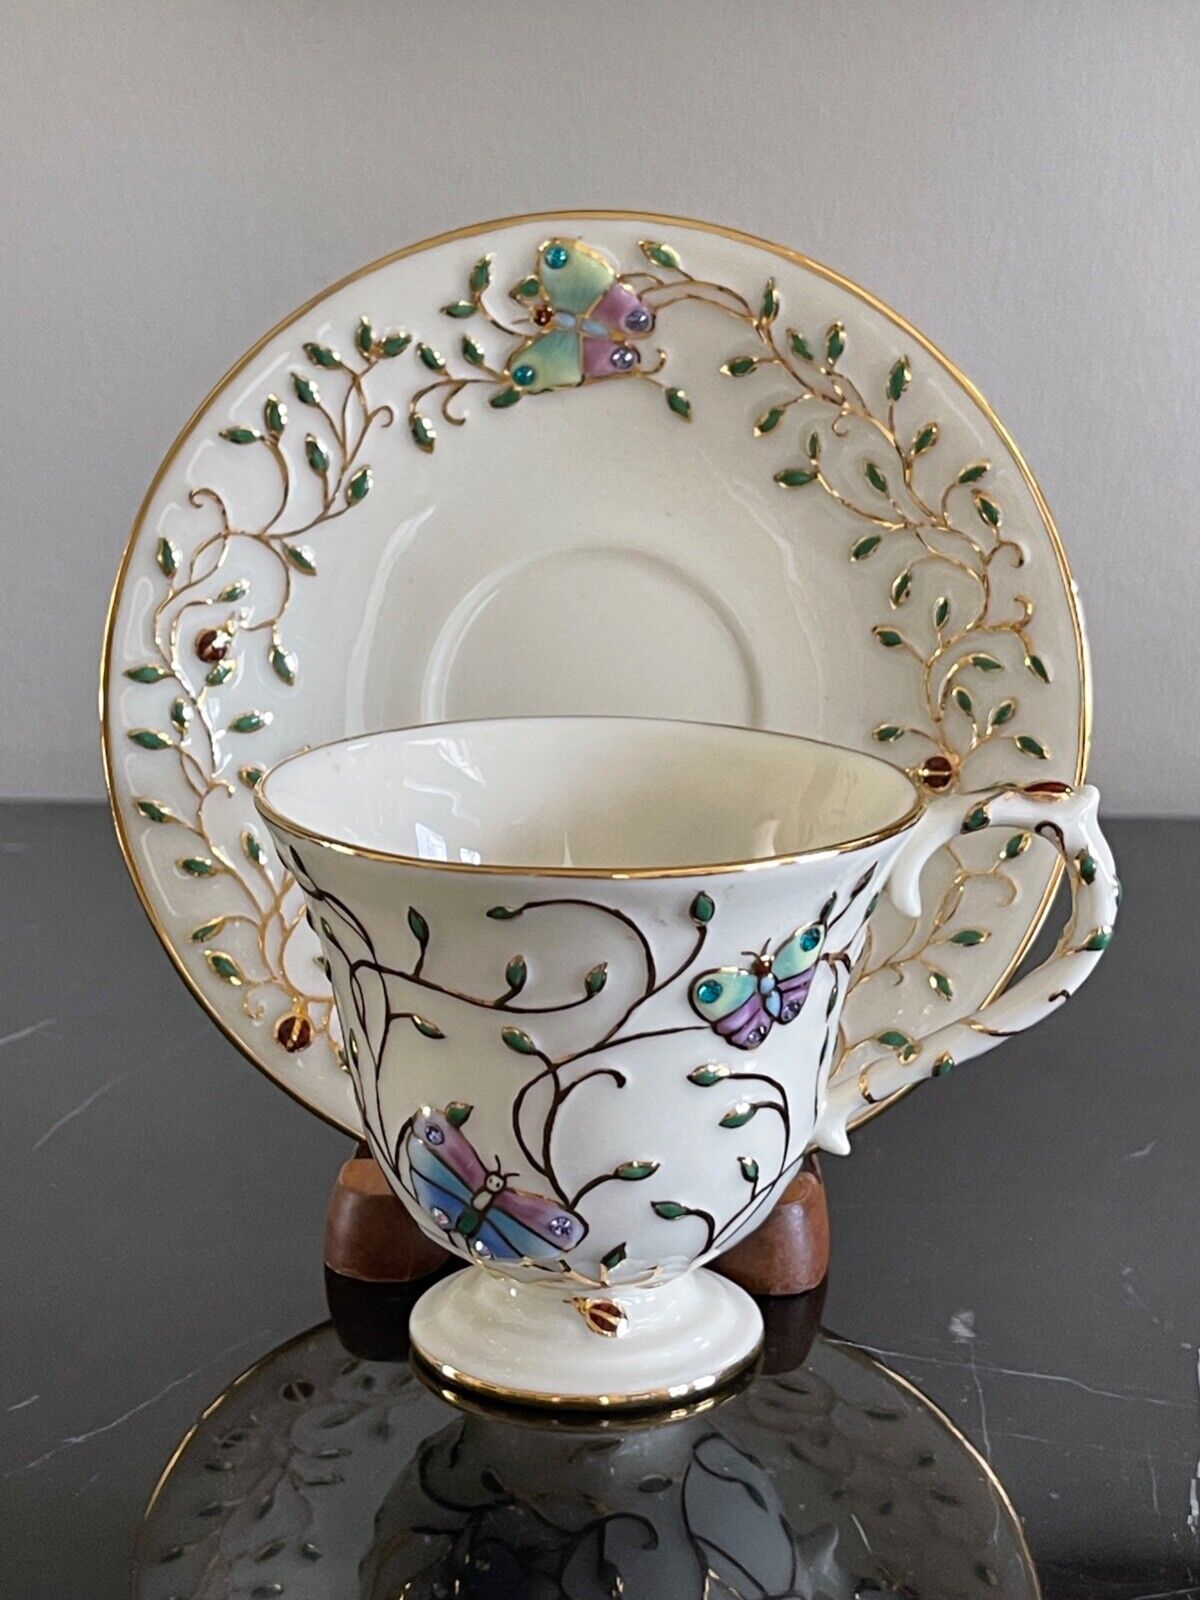 Lenox 2006 Summer Enchantment By Parvaneh Holloway Porcelain Cup and Saucer - $69.30